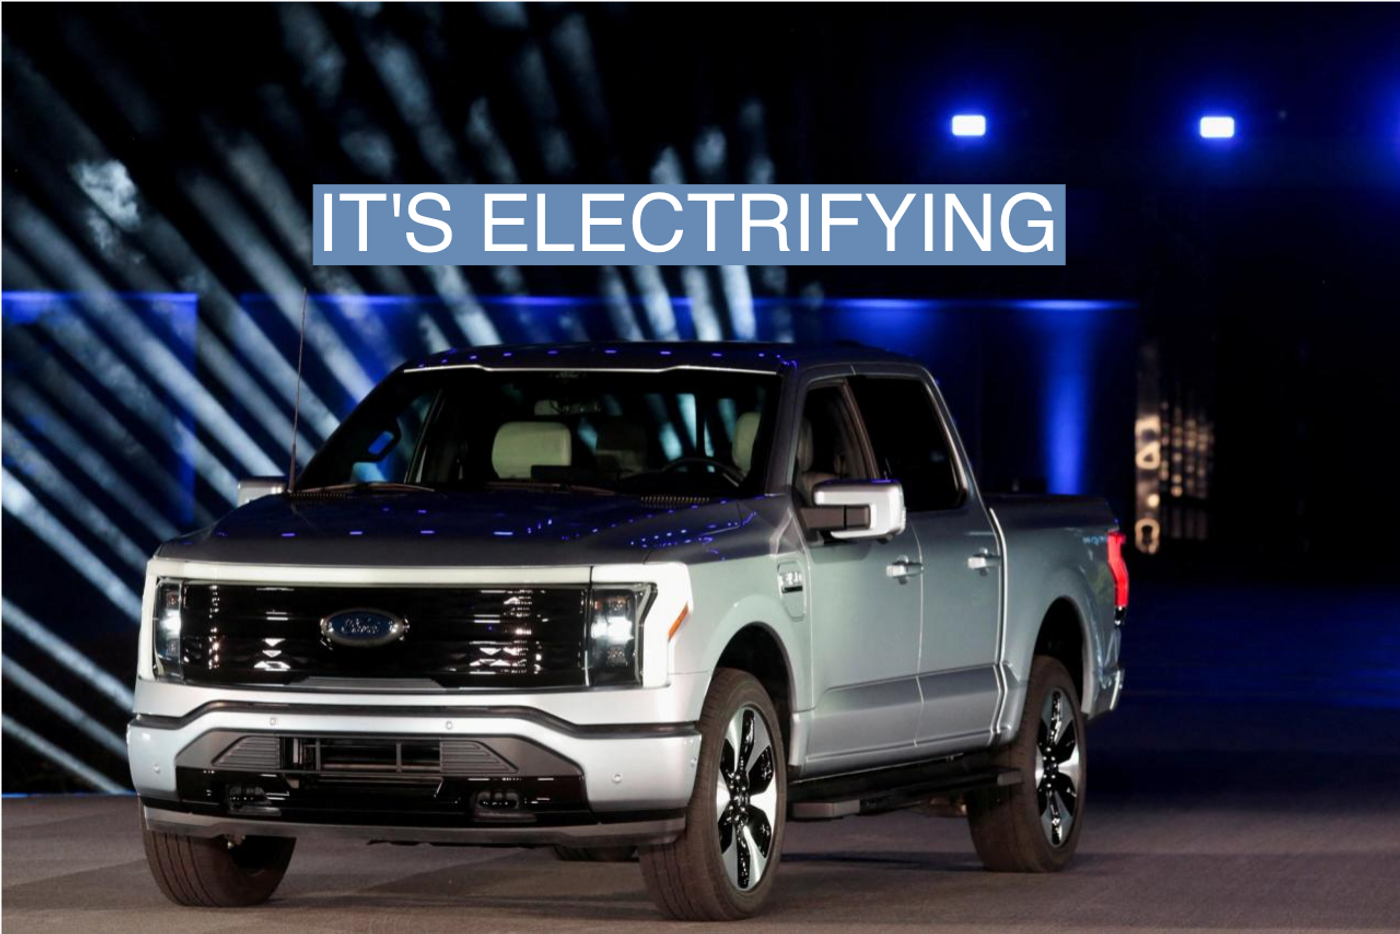 Up close with the Ford F-150 Lightning electric pickup truck - The Verge